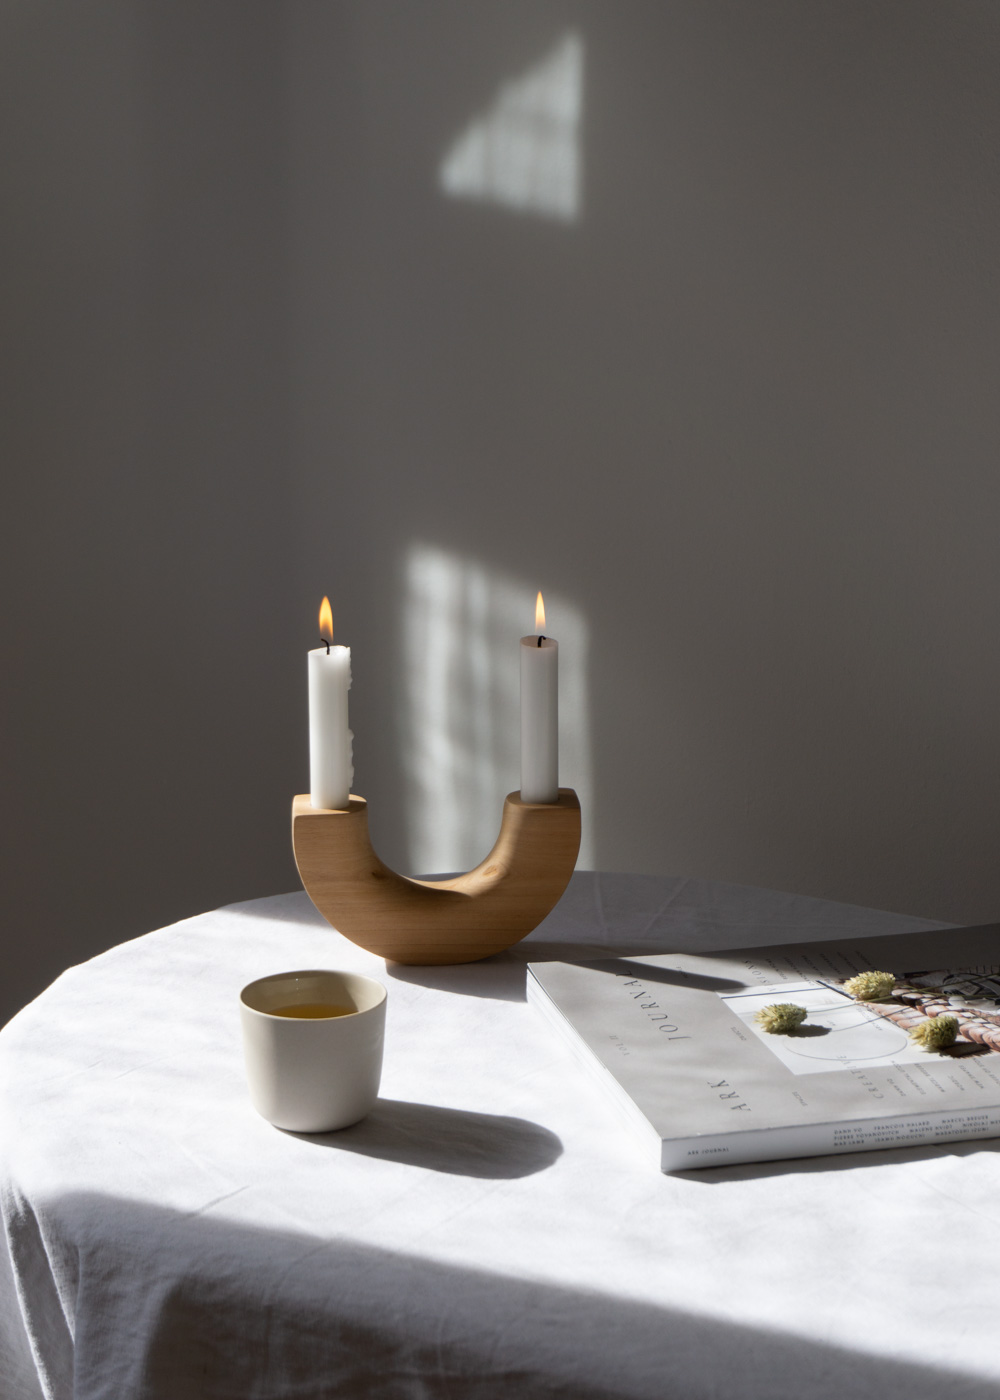 Foresta Arco Candle Holder, Ark Journal, KleoCo. Ceramics ~ Table Setting, Slow Living, Simple For Everyday, Ethical Sustainable Brand, Fair Trade Design | Minimalist Home, Scandinavian Design, Sustainable Home, Natural Aesthetic | Product Photography, Light and Shadows | RG Daily Blog